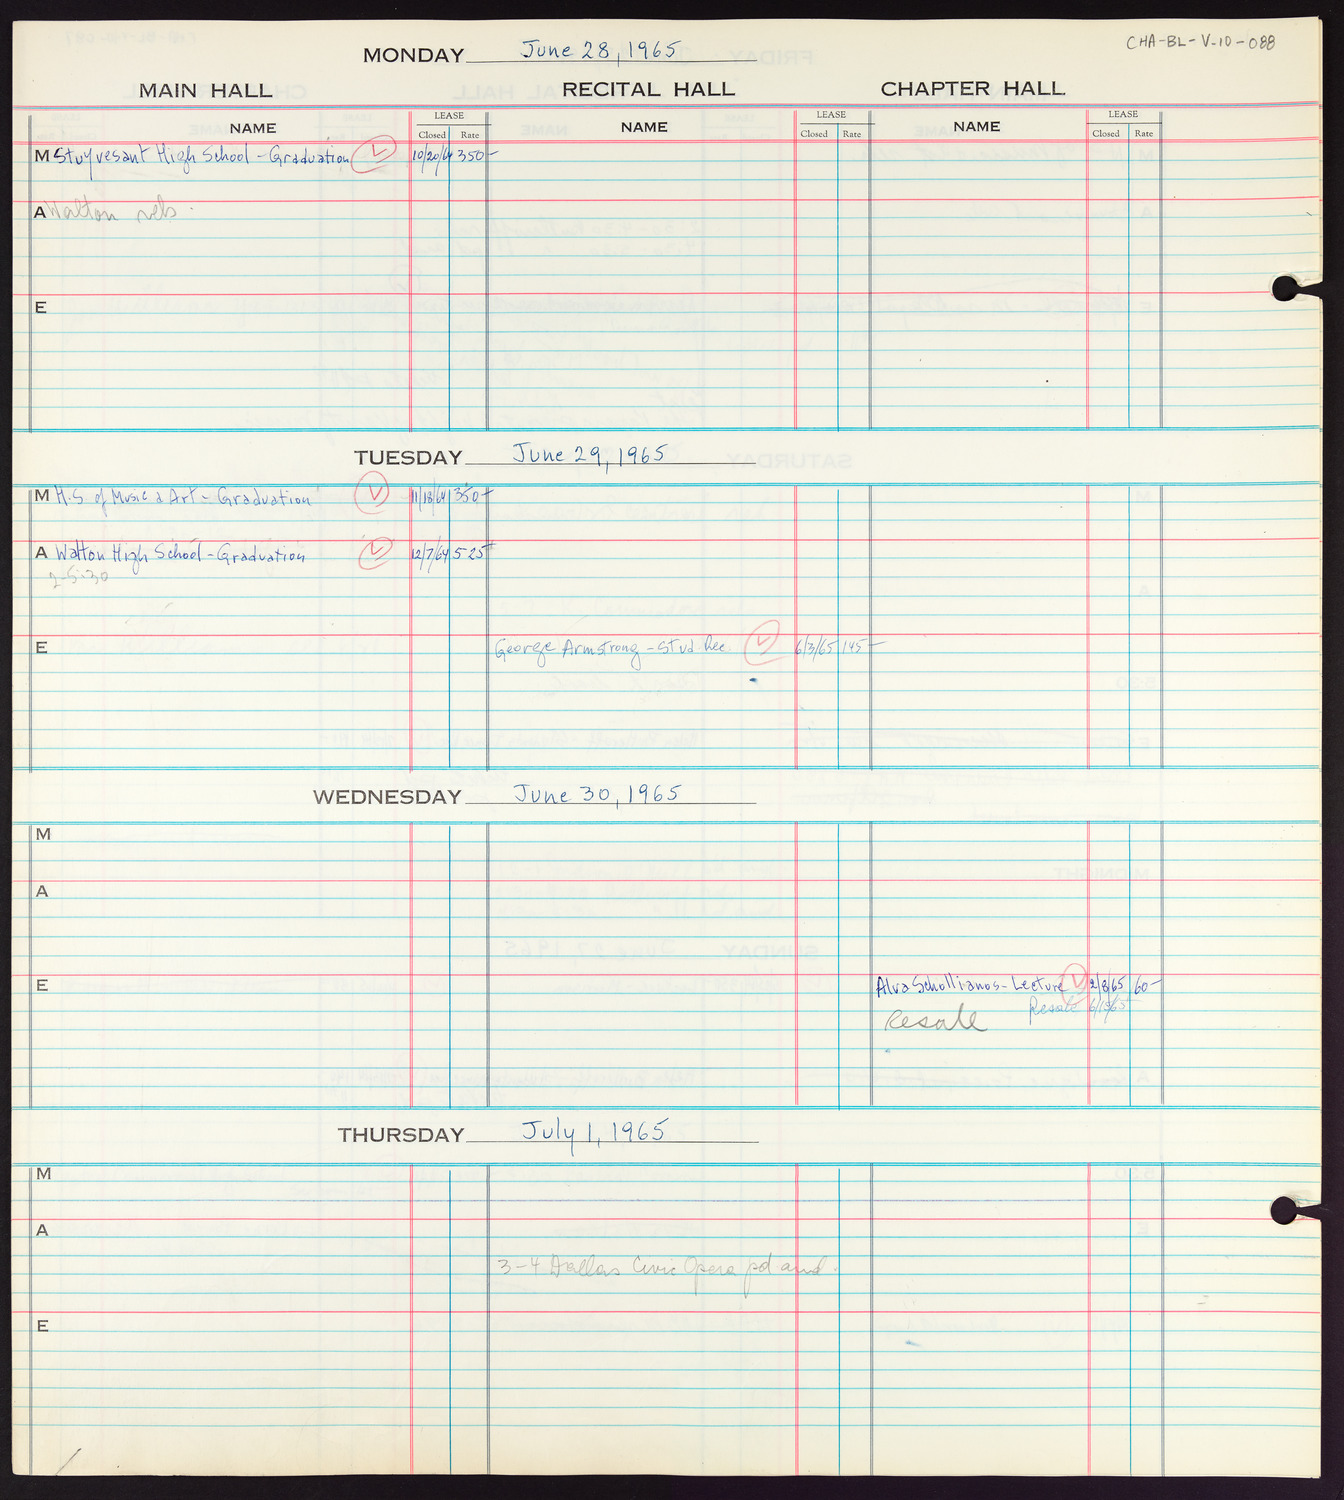 Carnegie Hall Booking Ledger, volume 10, page 88